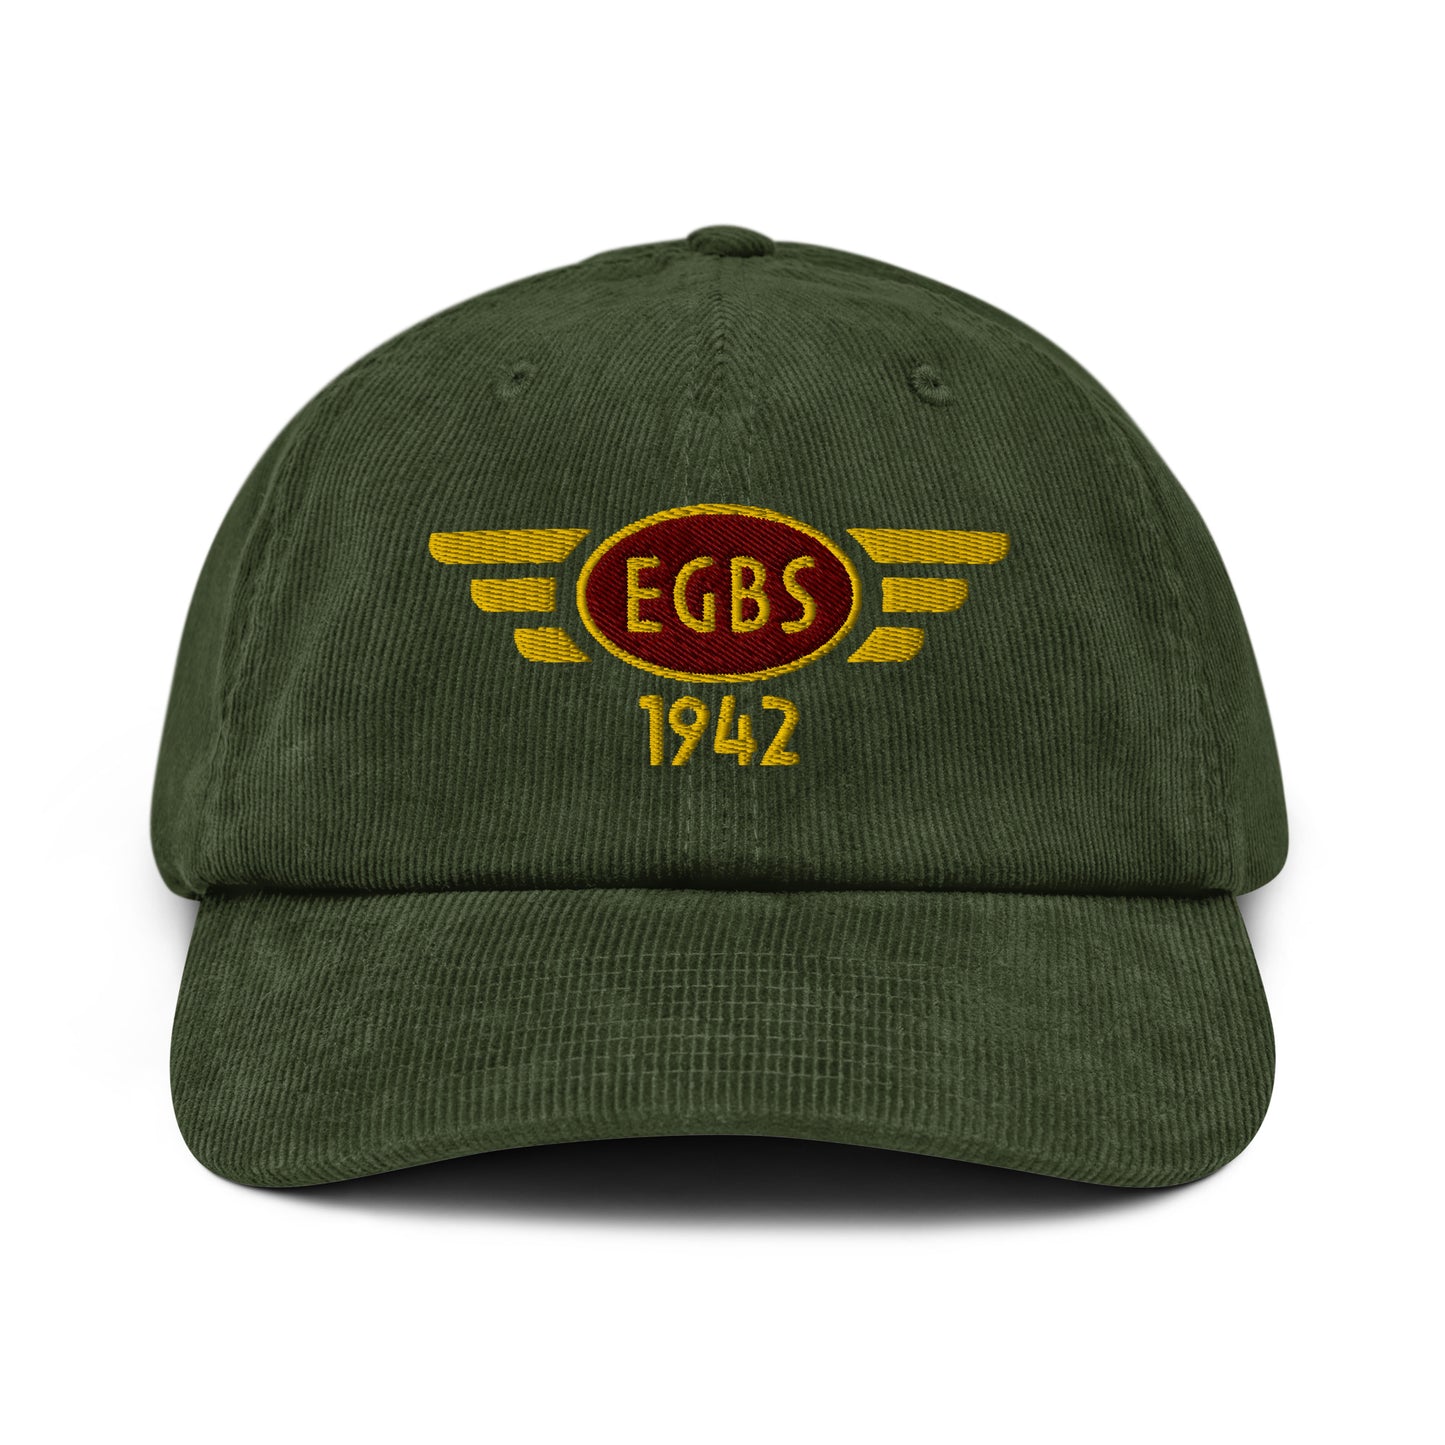 Shobdon Airfield corduroy cap with embroidered ICAO code.